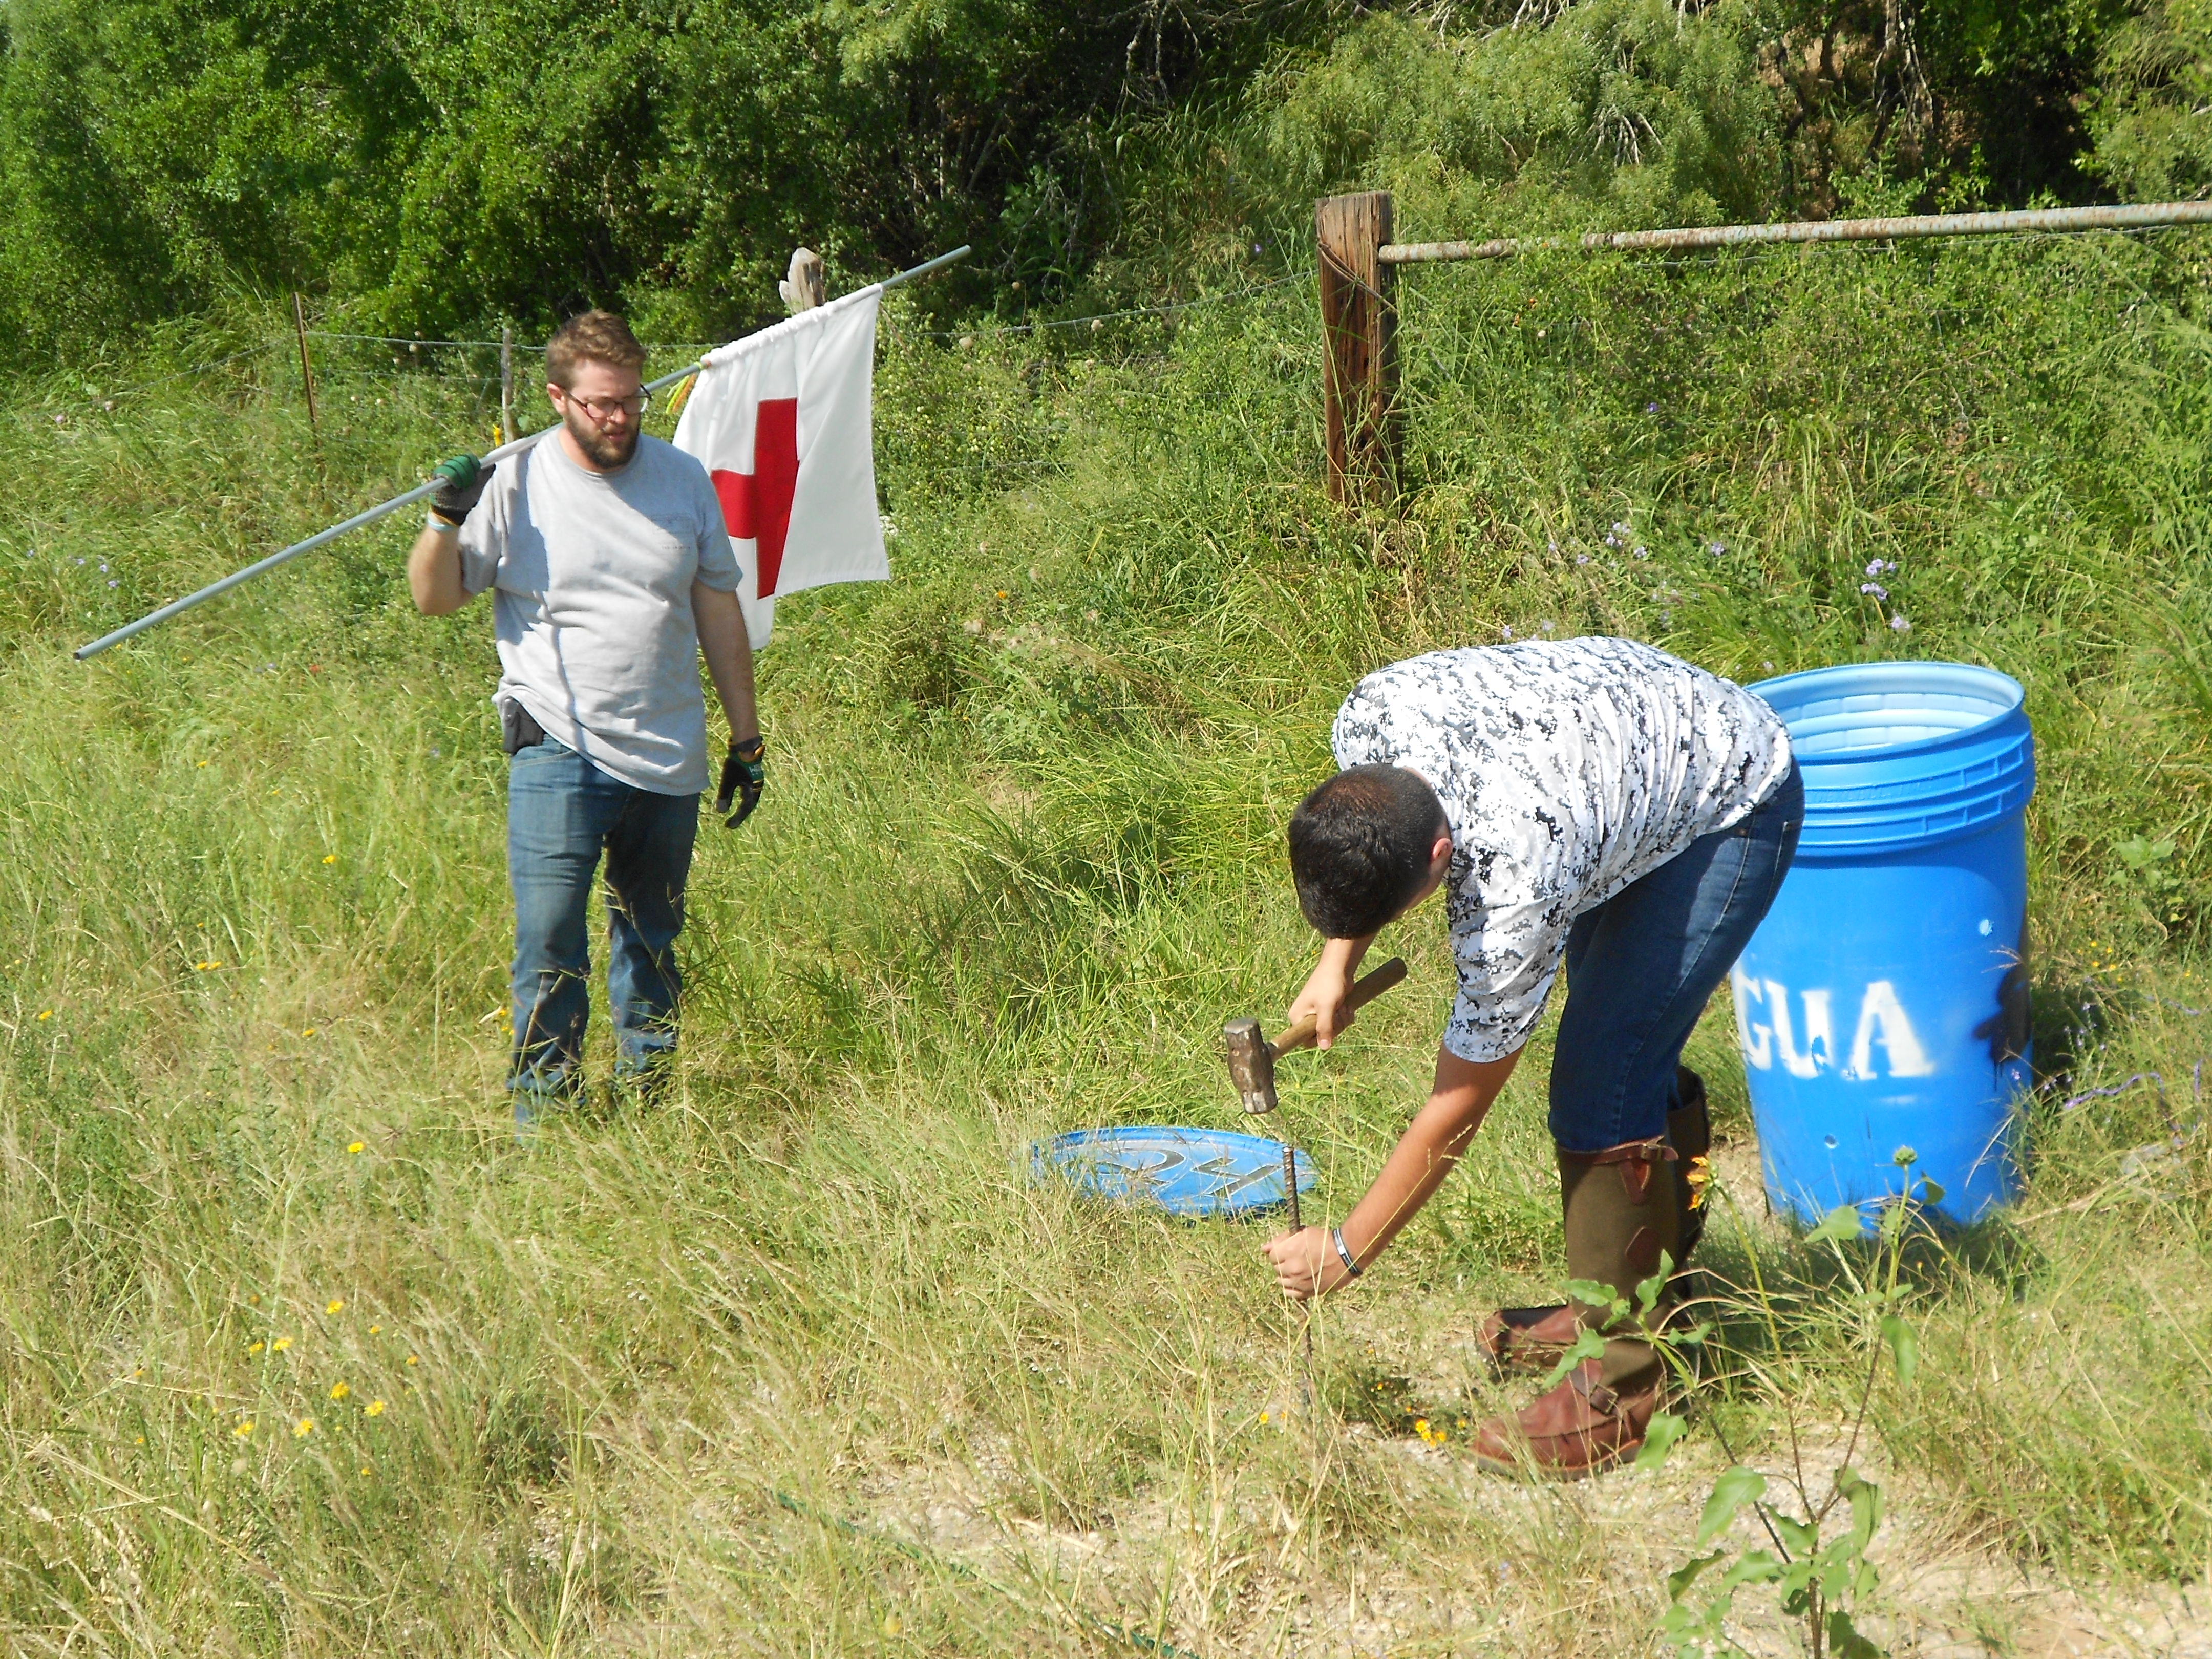 Justin and another volunteer repairing a water station.